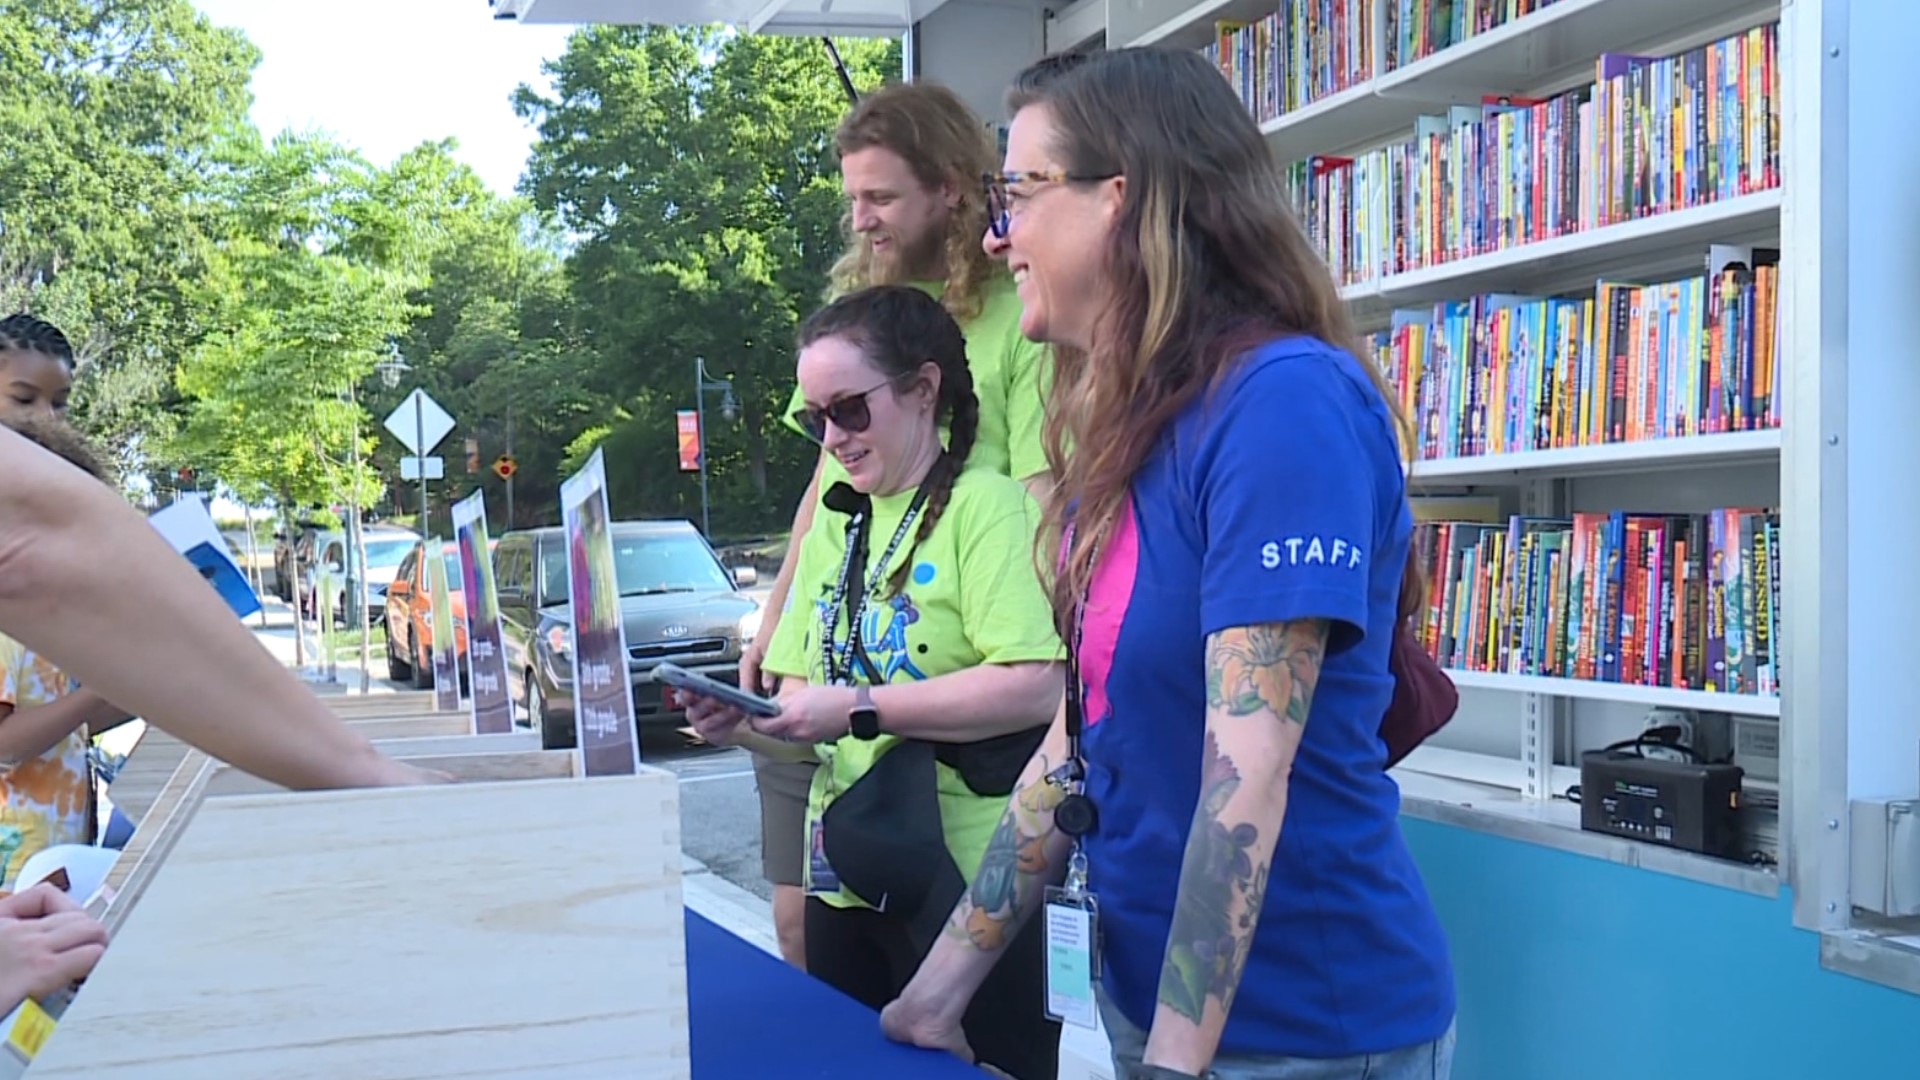 Fayetteville Public Library started its summer reading program. Anyone can sign up for the club, earn points for reading and win prizes all summer long.